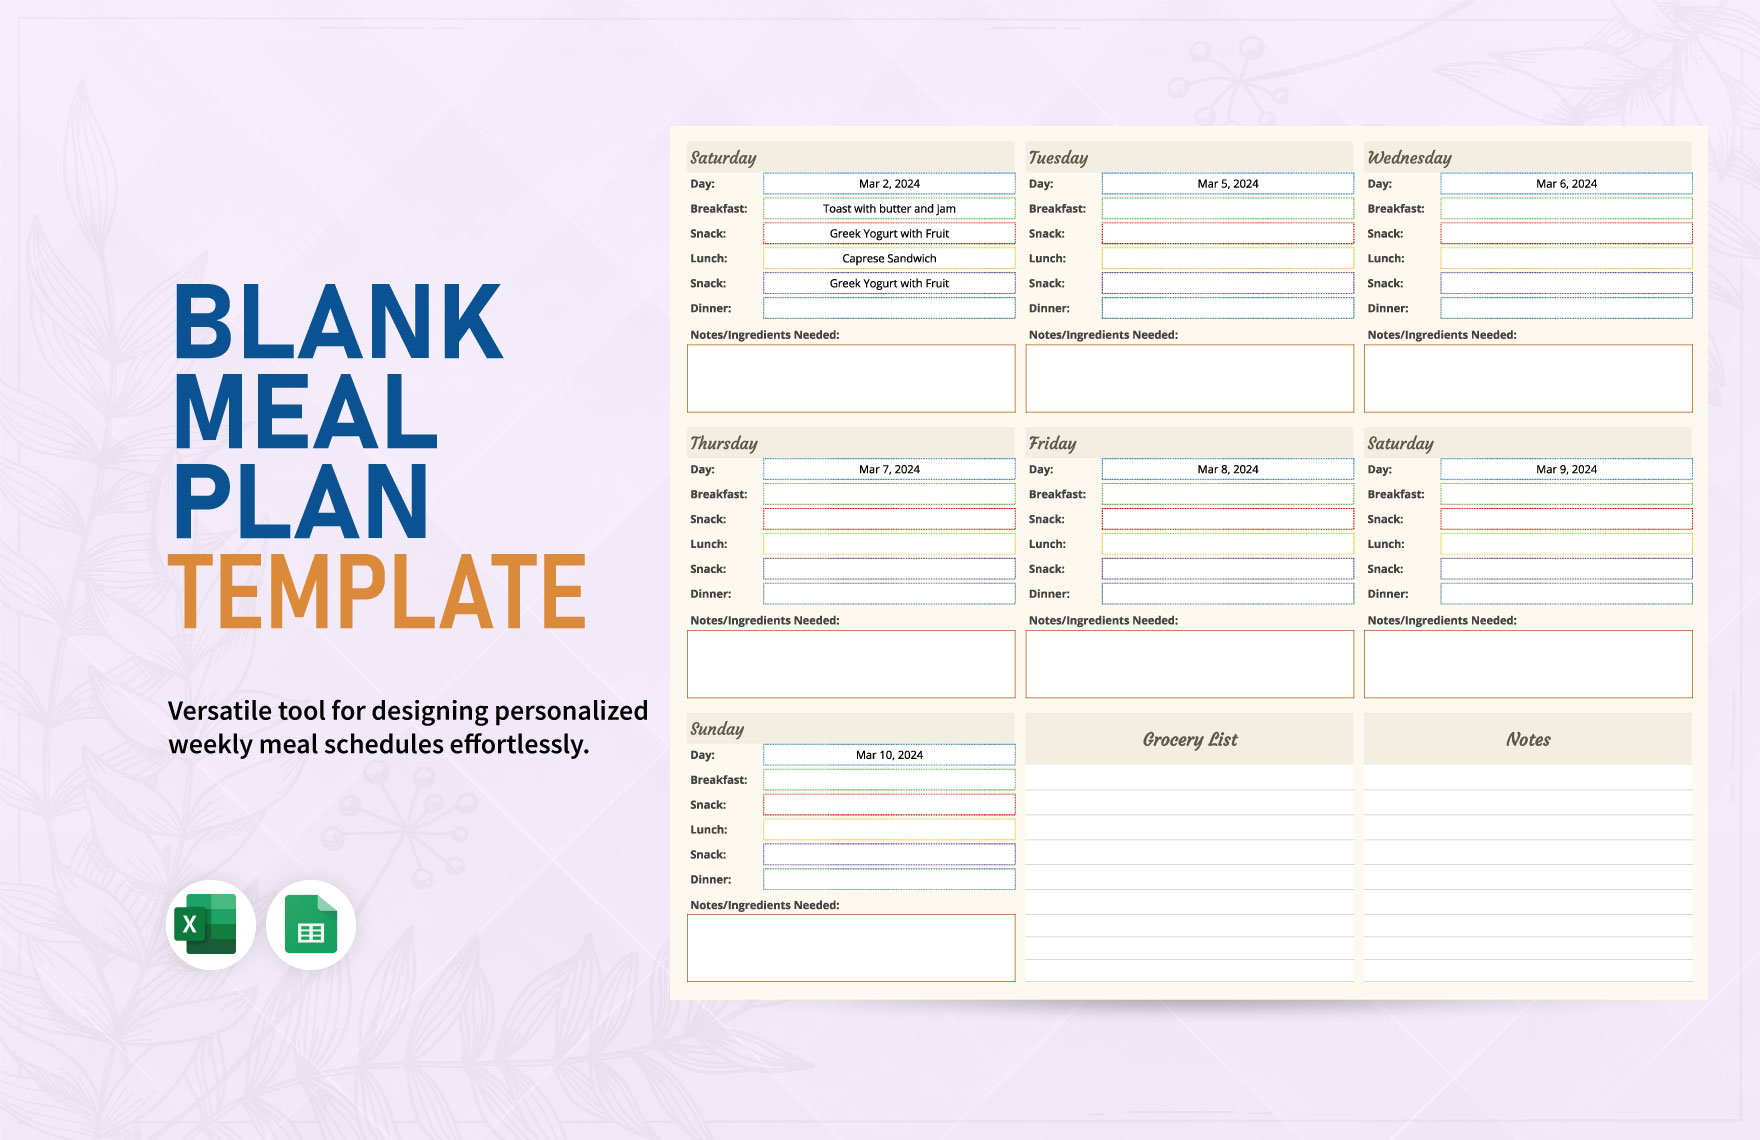 Blank Meal Plan Template in Excel, Google Sheets